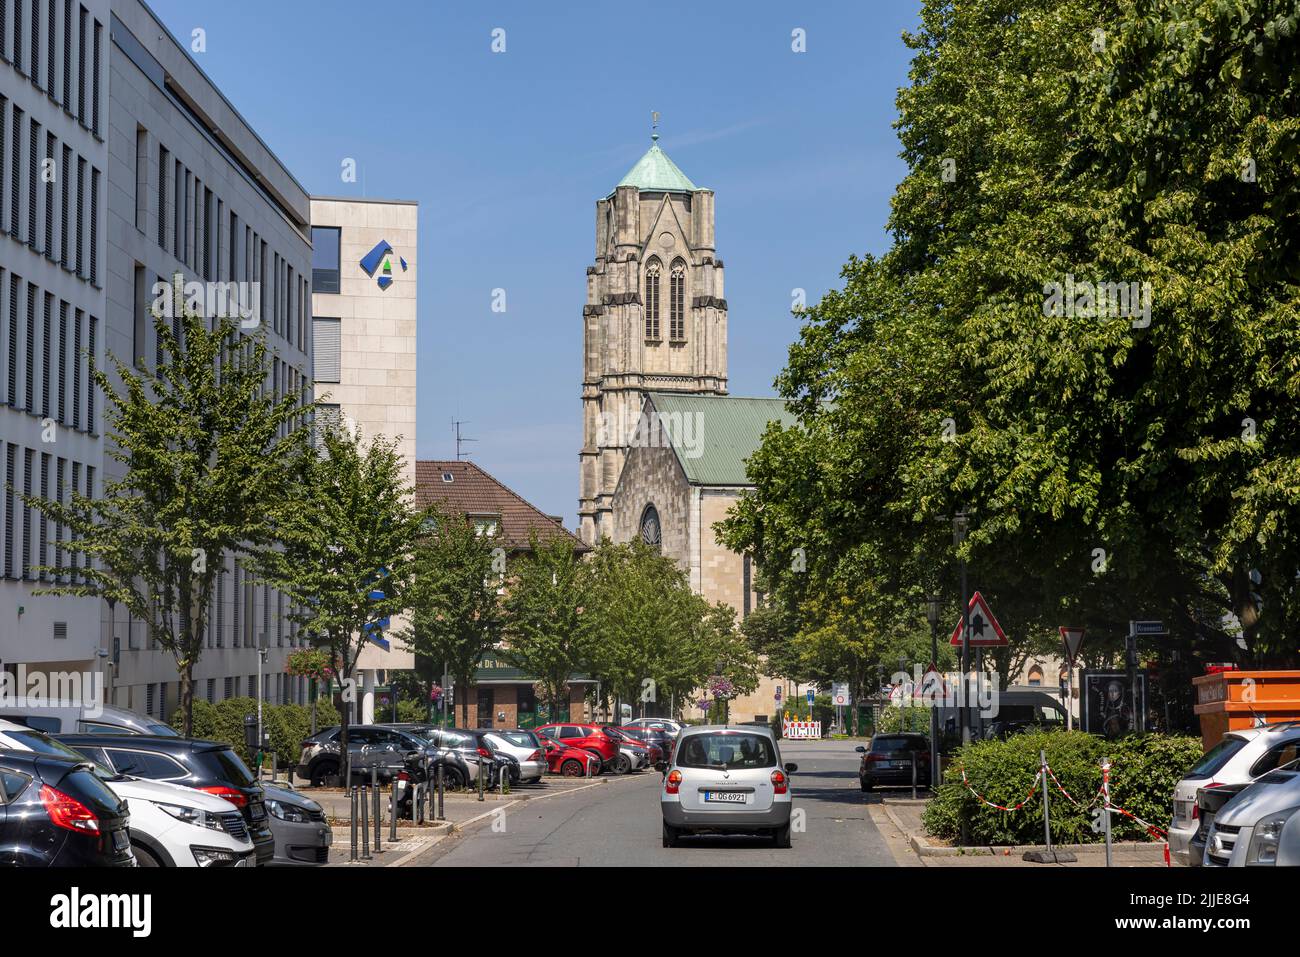 Vivid architecture of Essen, Germany, on a bright summer day Stock Photo